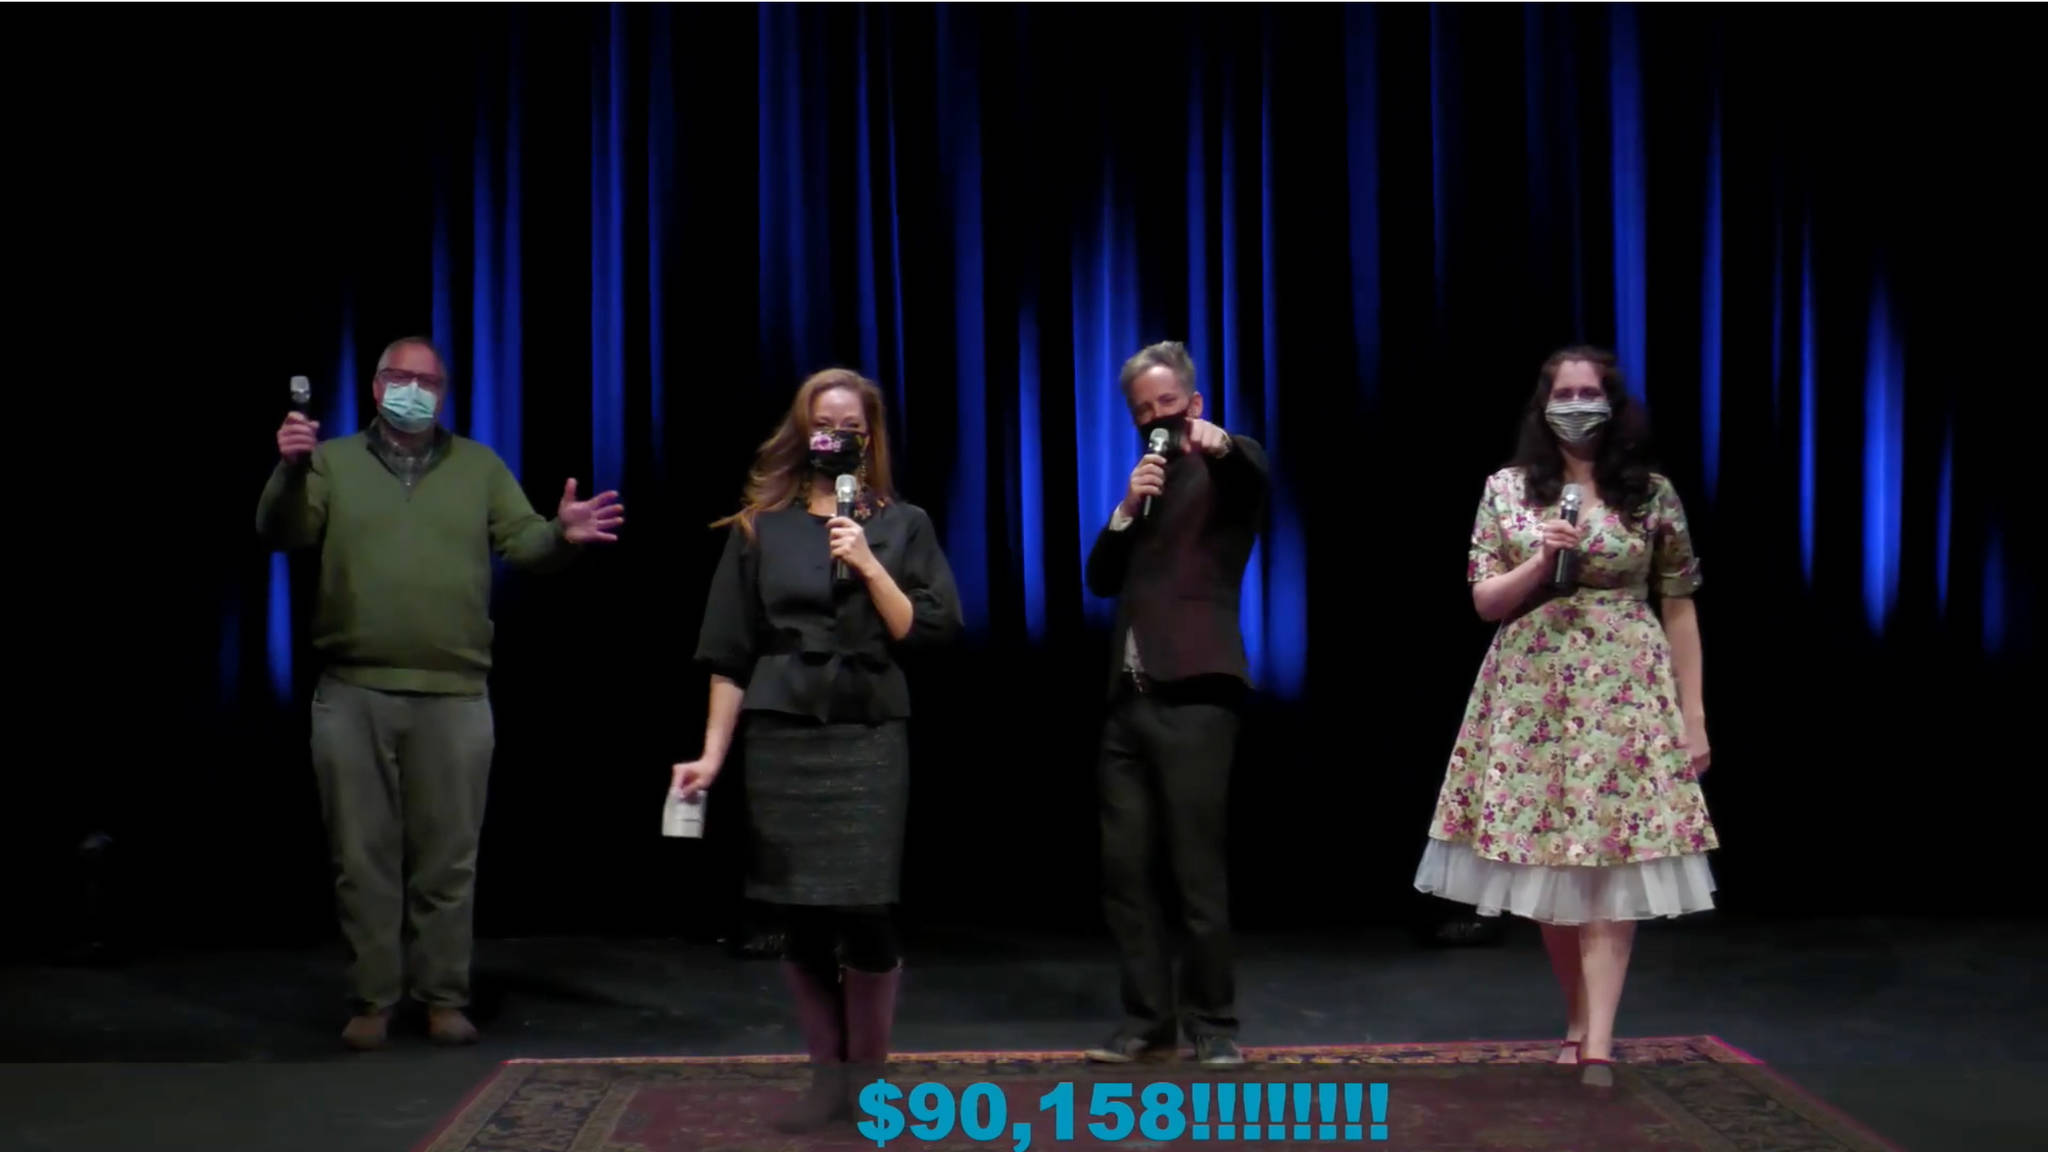 Left to right: Dimitri Stankevich, Nicole Matisse, Jake Perrine and Bethany Marie during the telethon.